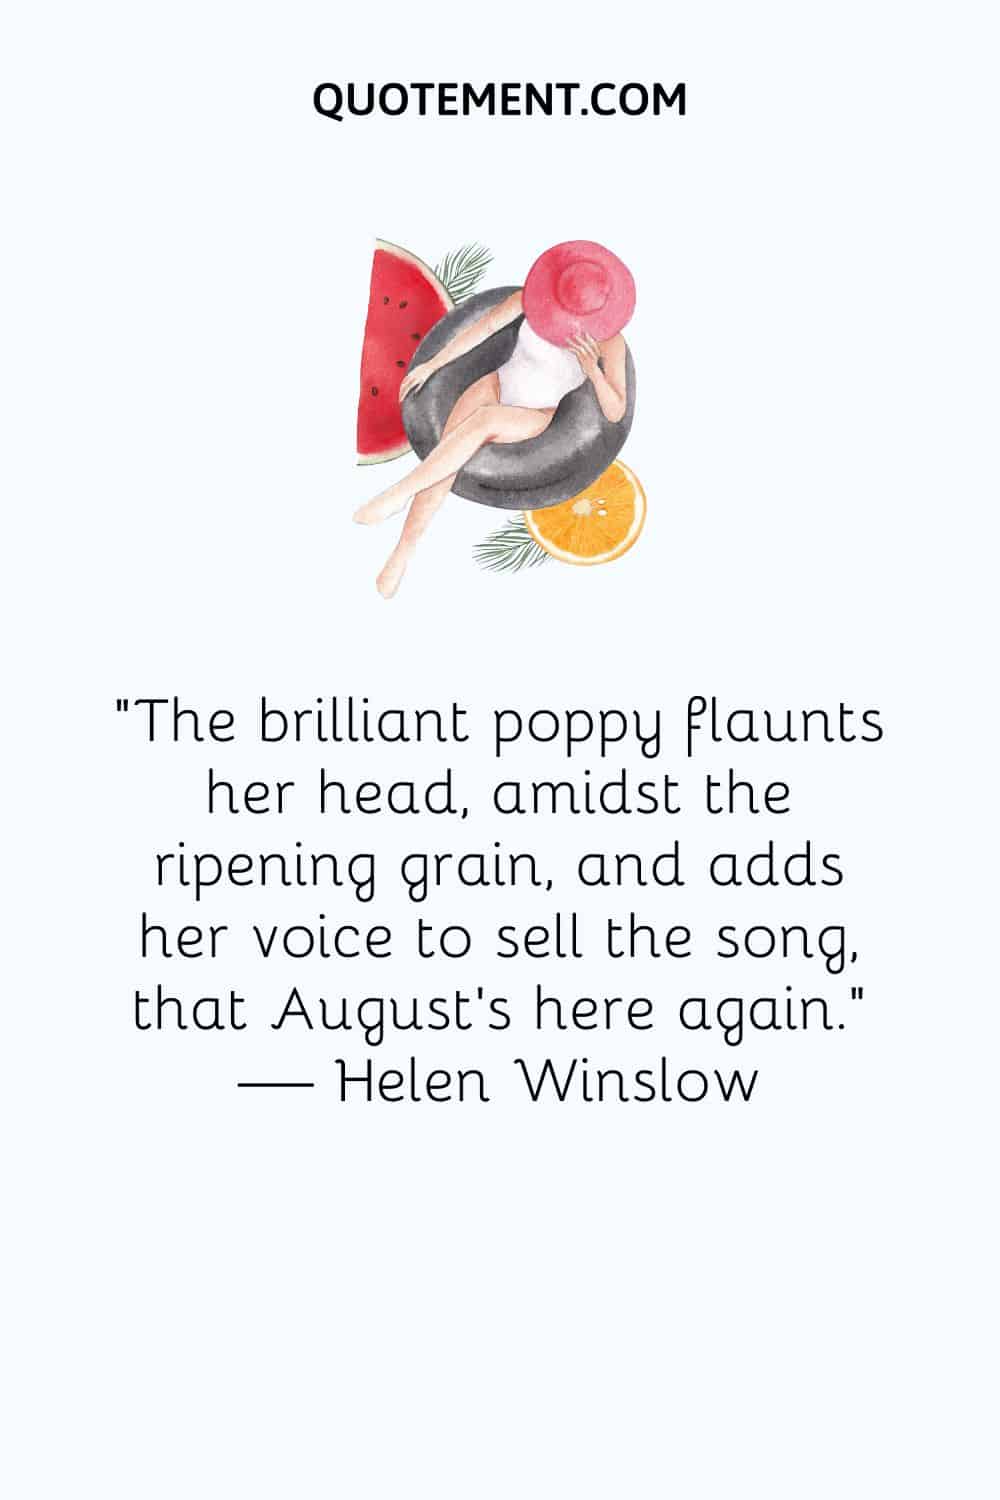 The brilliant poppy flaunts her head, amidst the ripening grain, and adds her voice to sell the song, that August’s here again